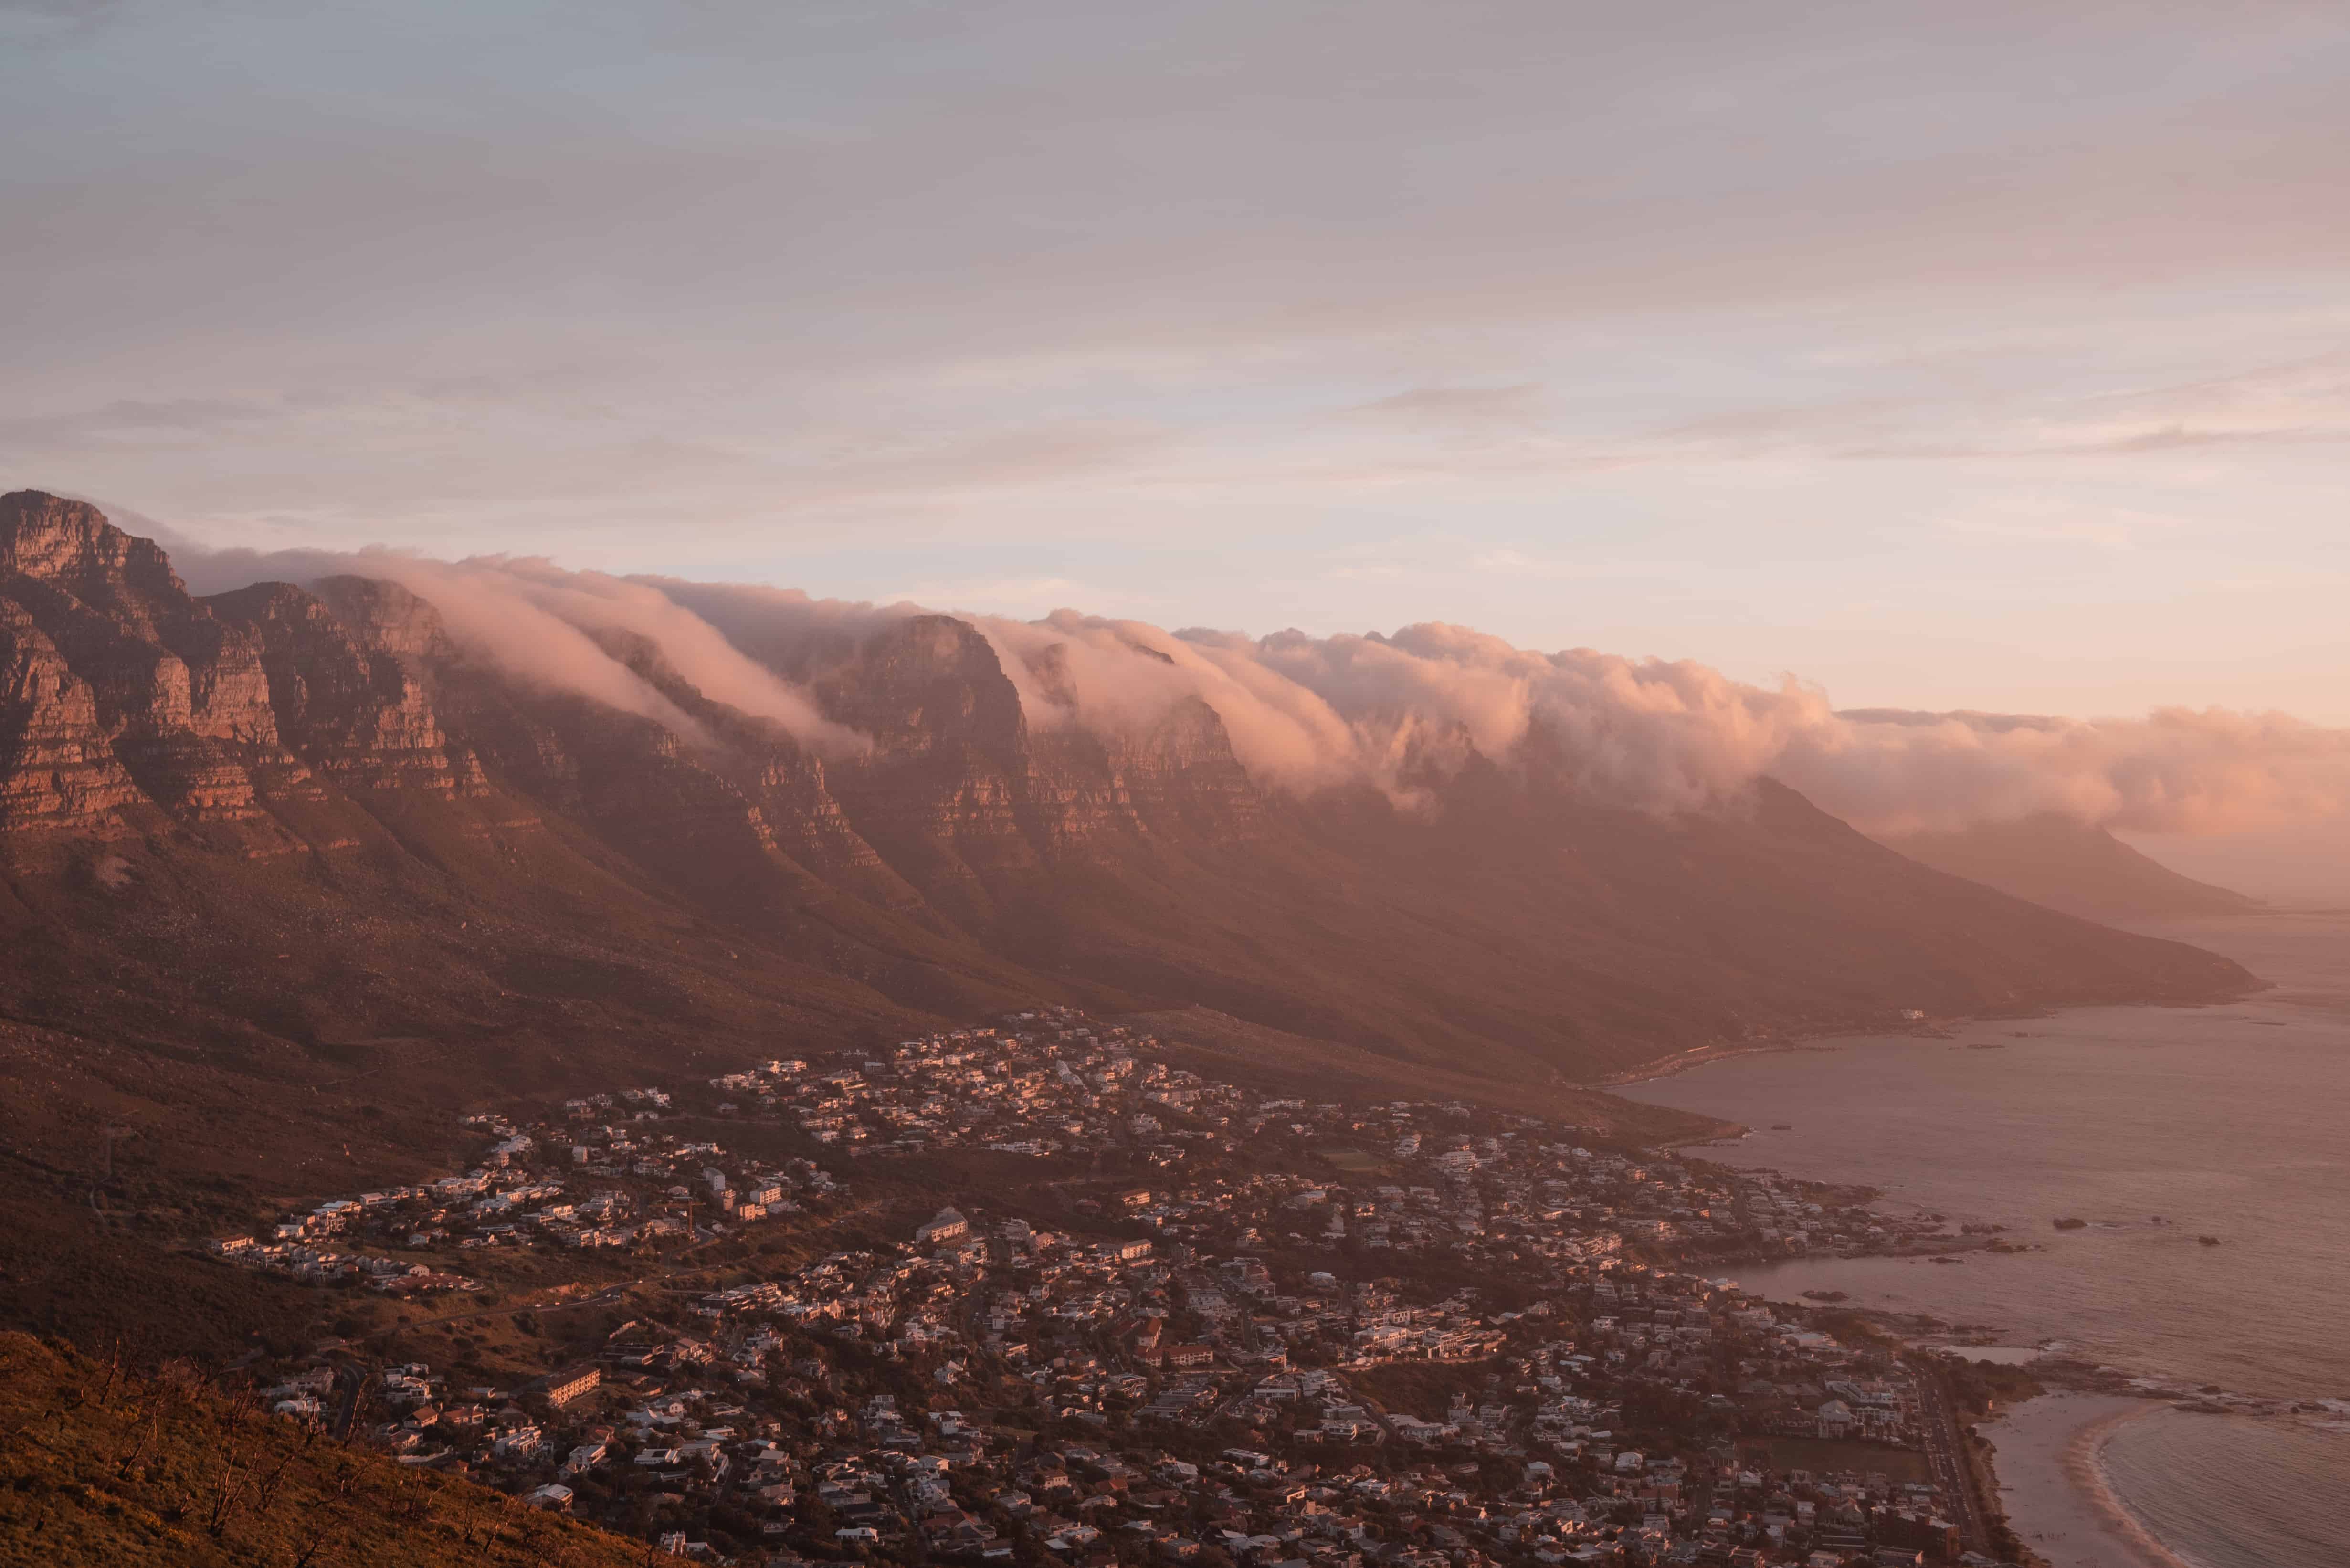 The city of cape town is seen from the top of a mountain.